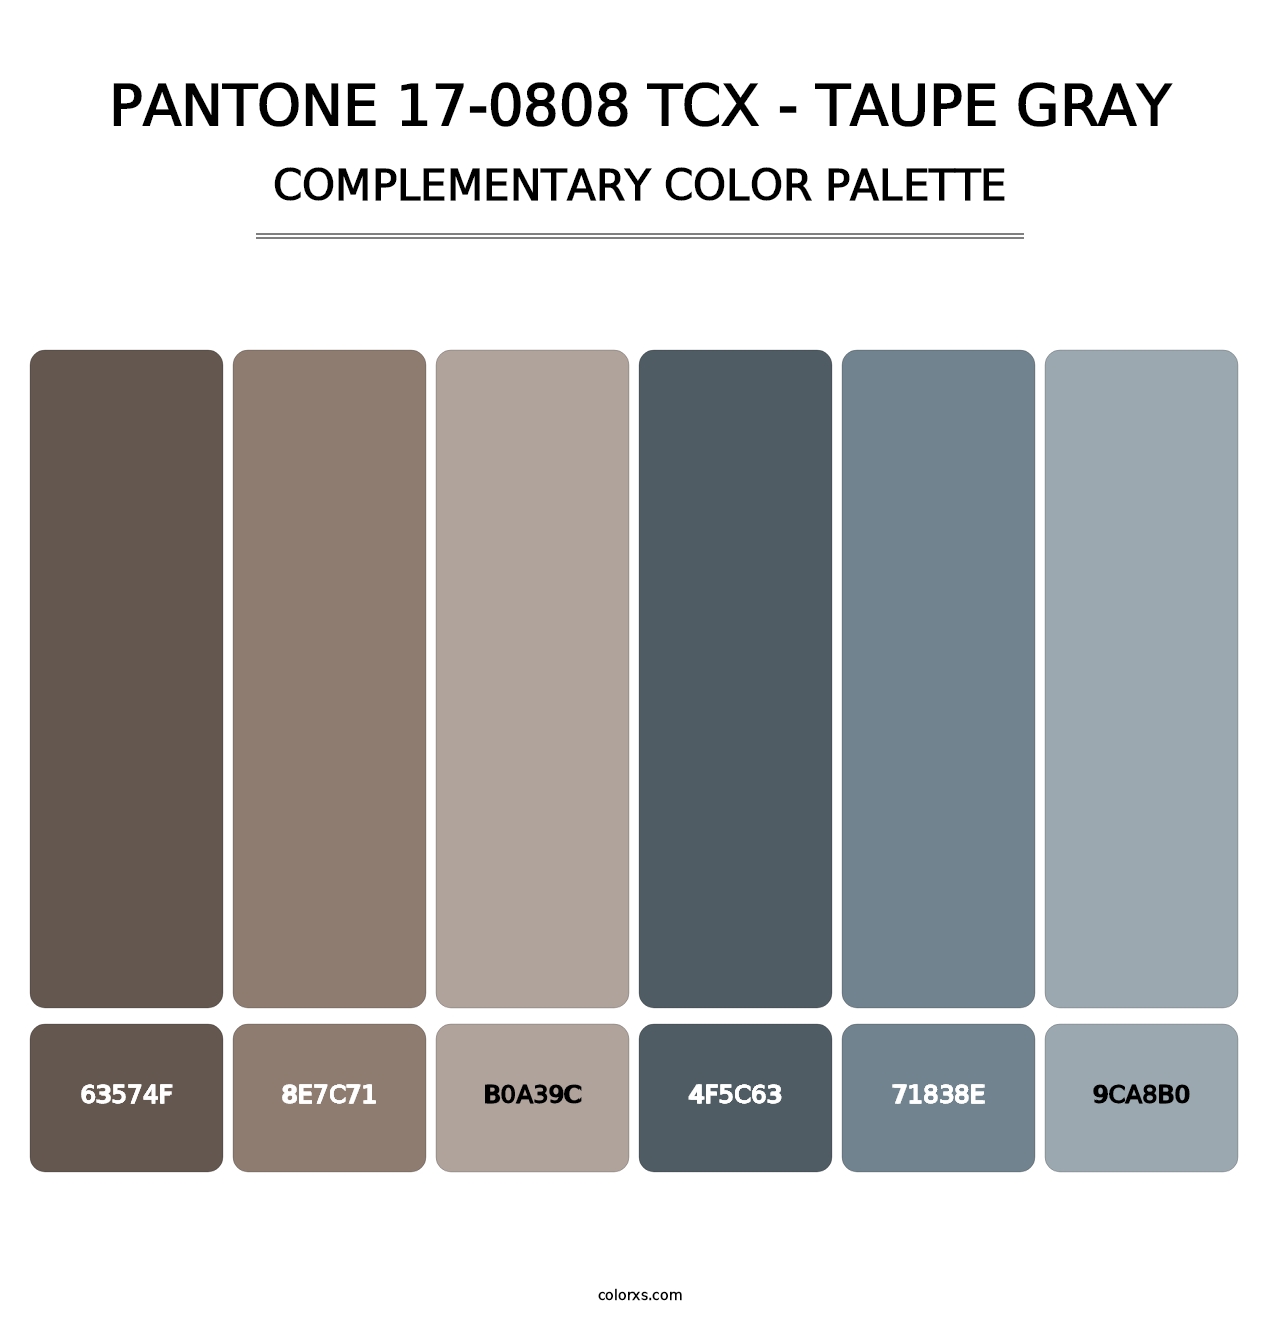 PANTONE 17-0808 TCX - Taupe Gray - Complementary Color Palette